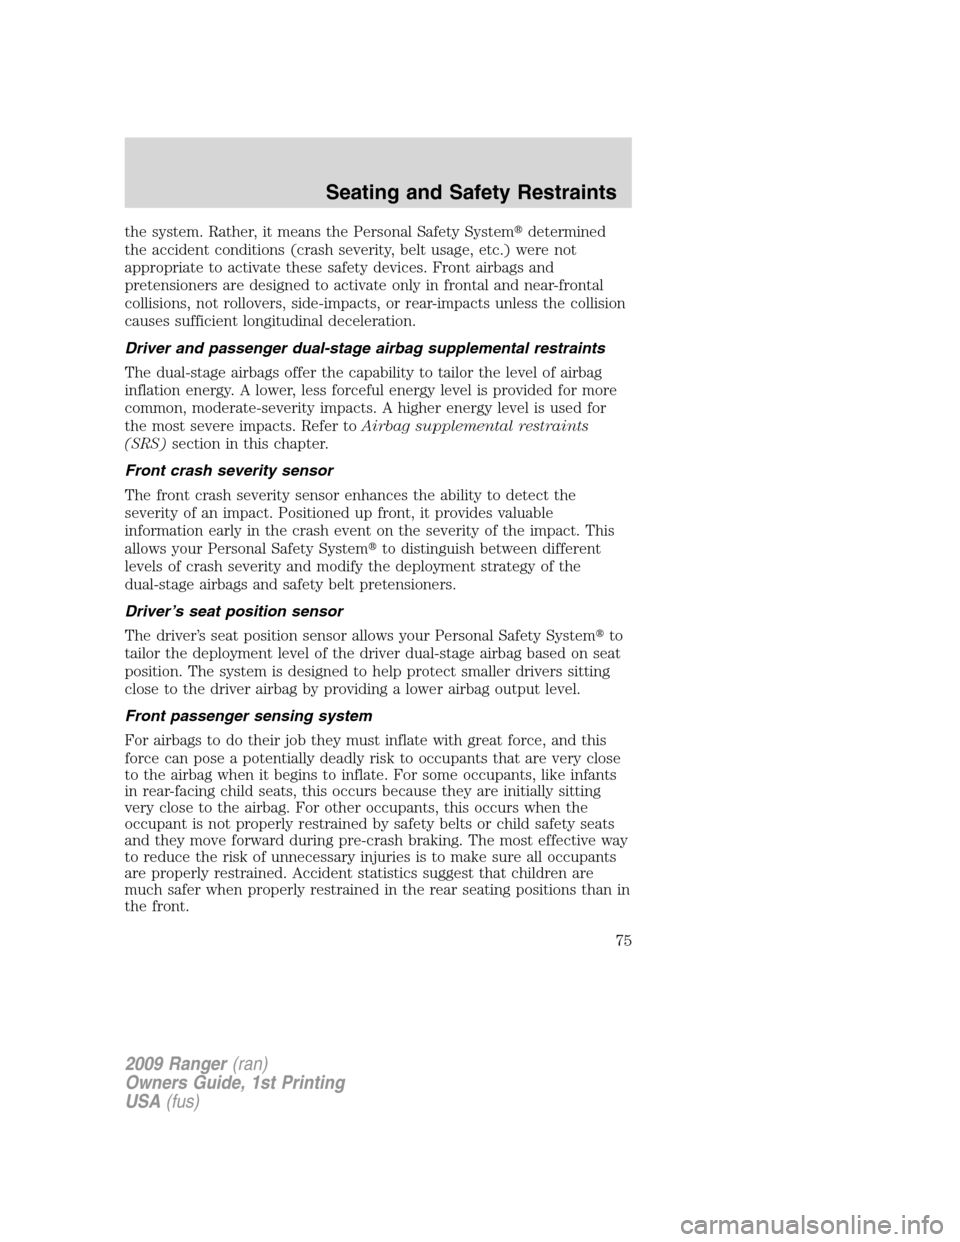 FORD RANGER 2009 2.G Owners Manual the system. Rather, it means the Personal Safety Systemdetermined
the accident conditions (crash severity, belt usage, etc.) were not
appropriate to activate these safety devices. Front airbags and
p